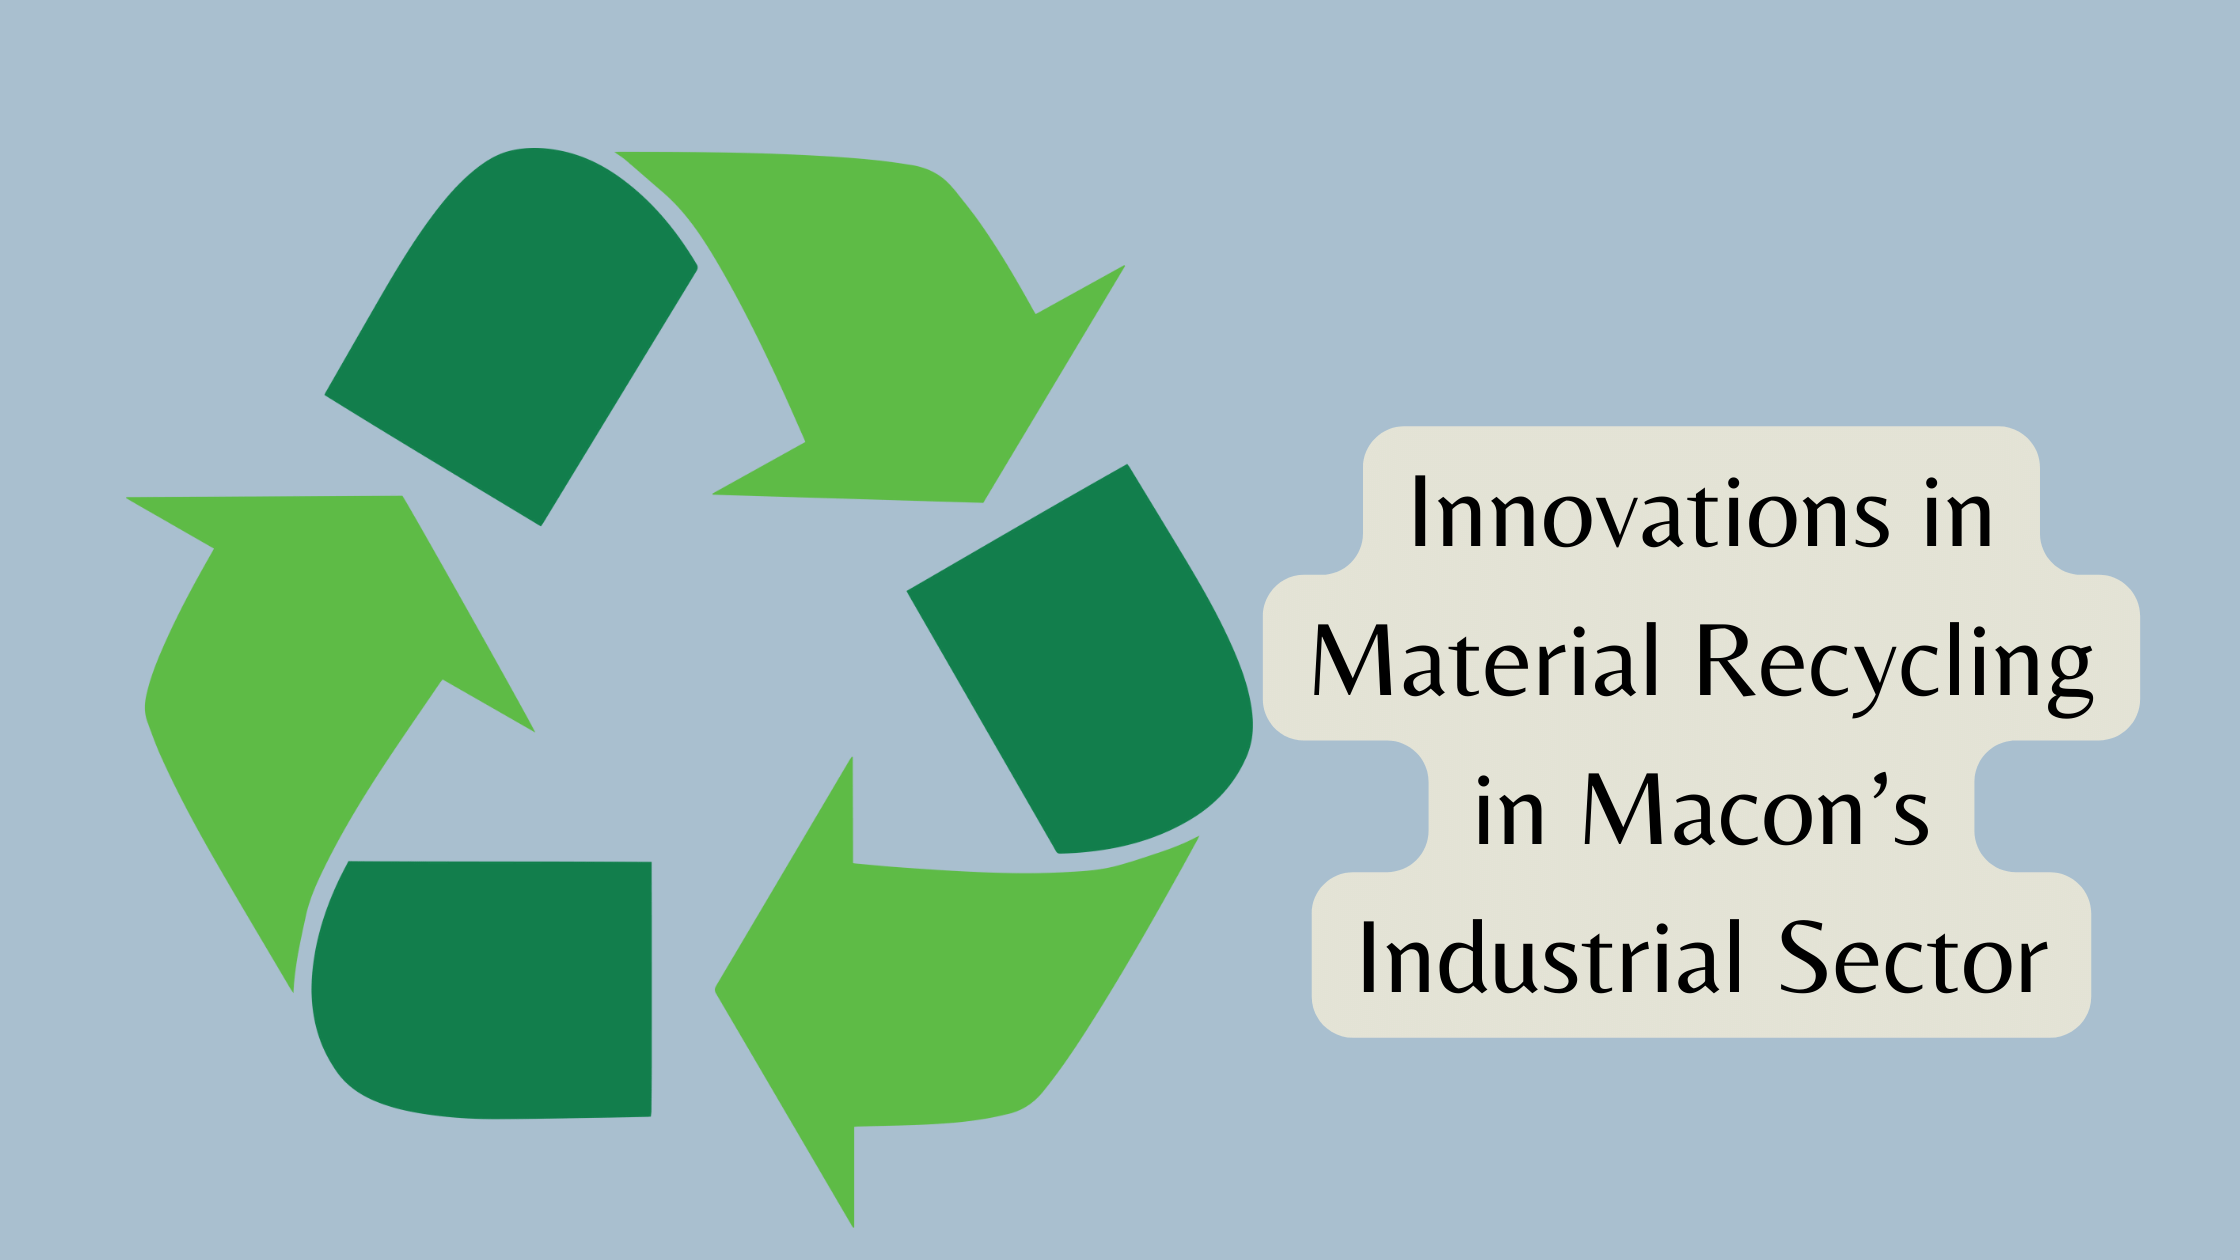 Material Recycling